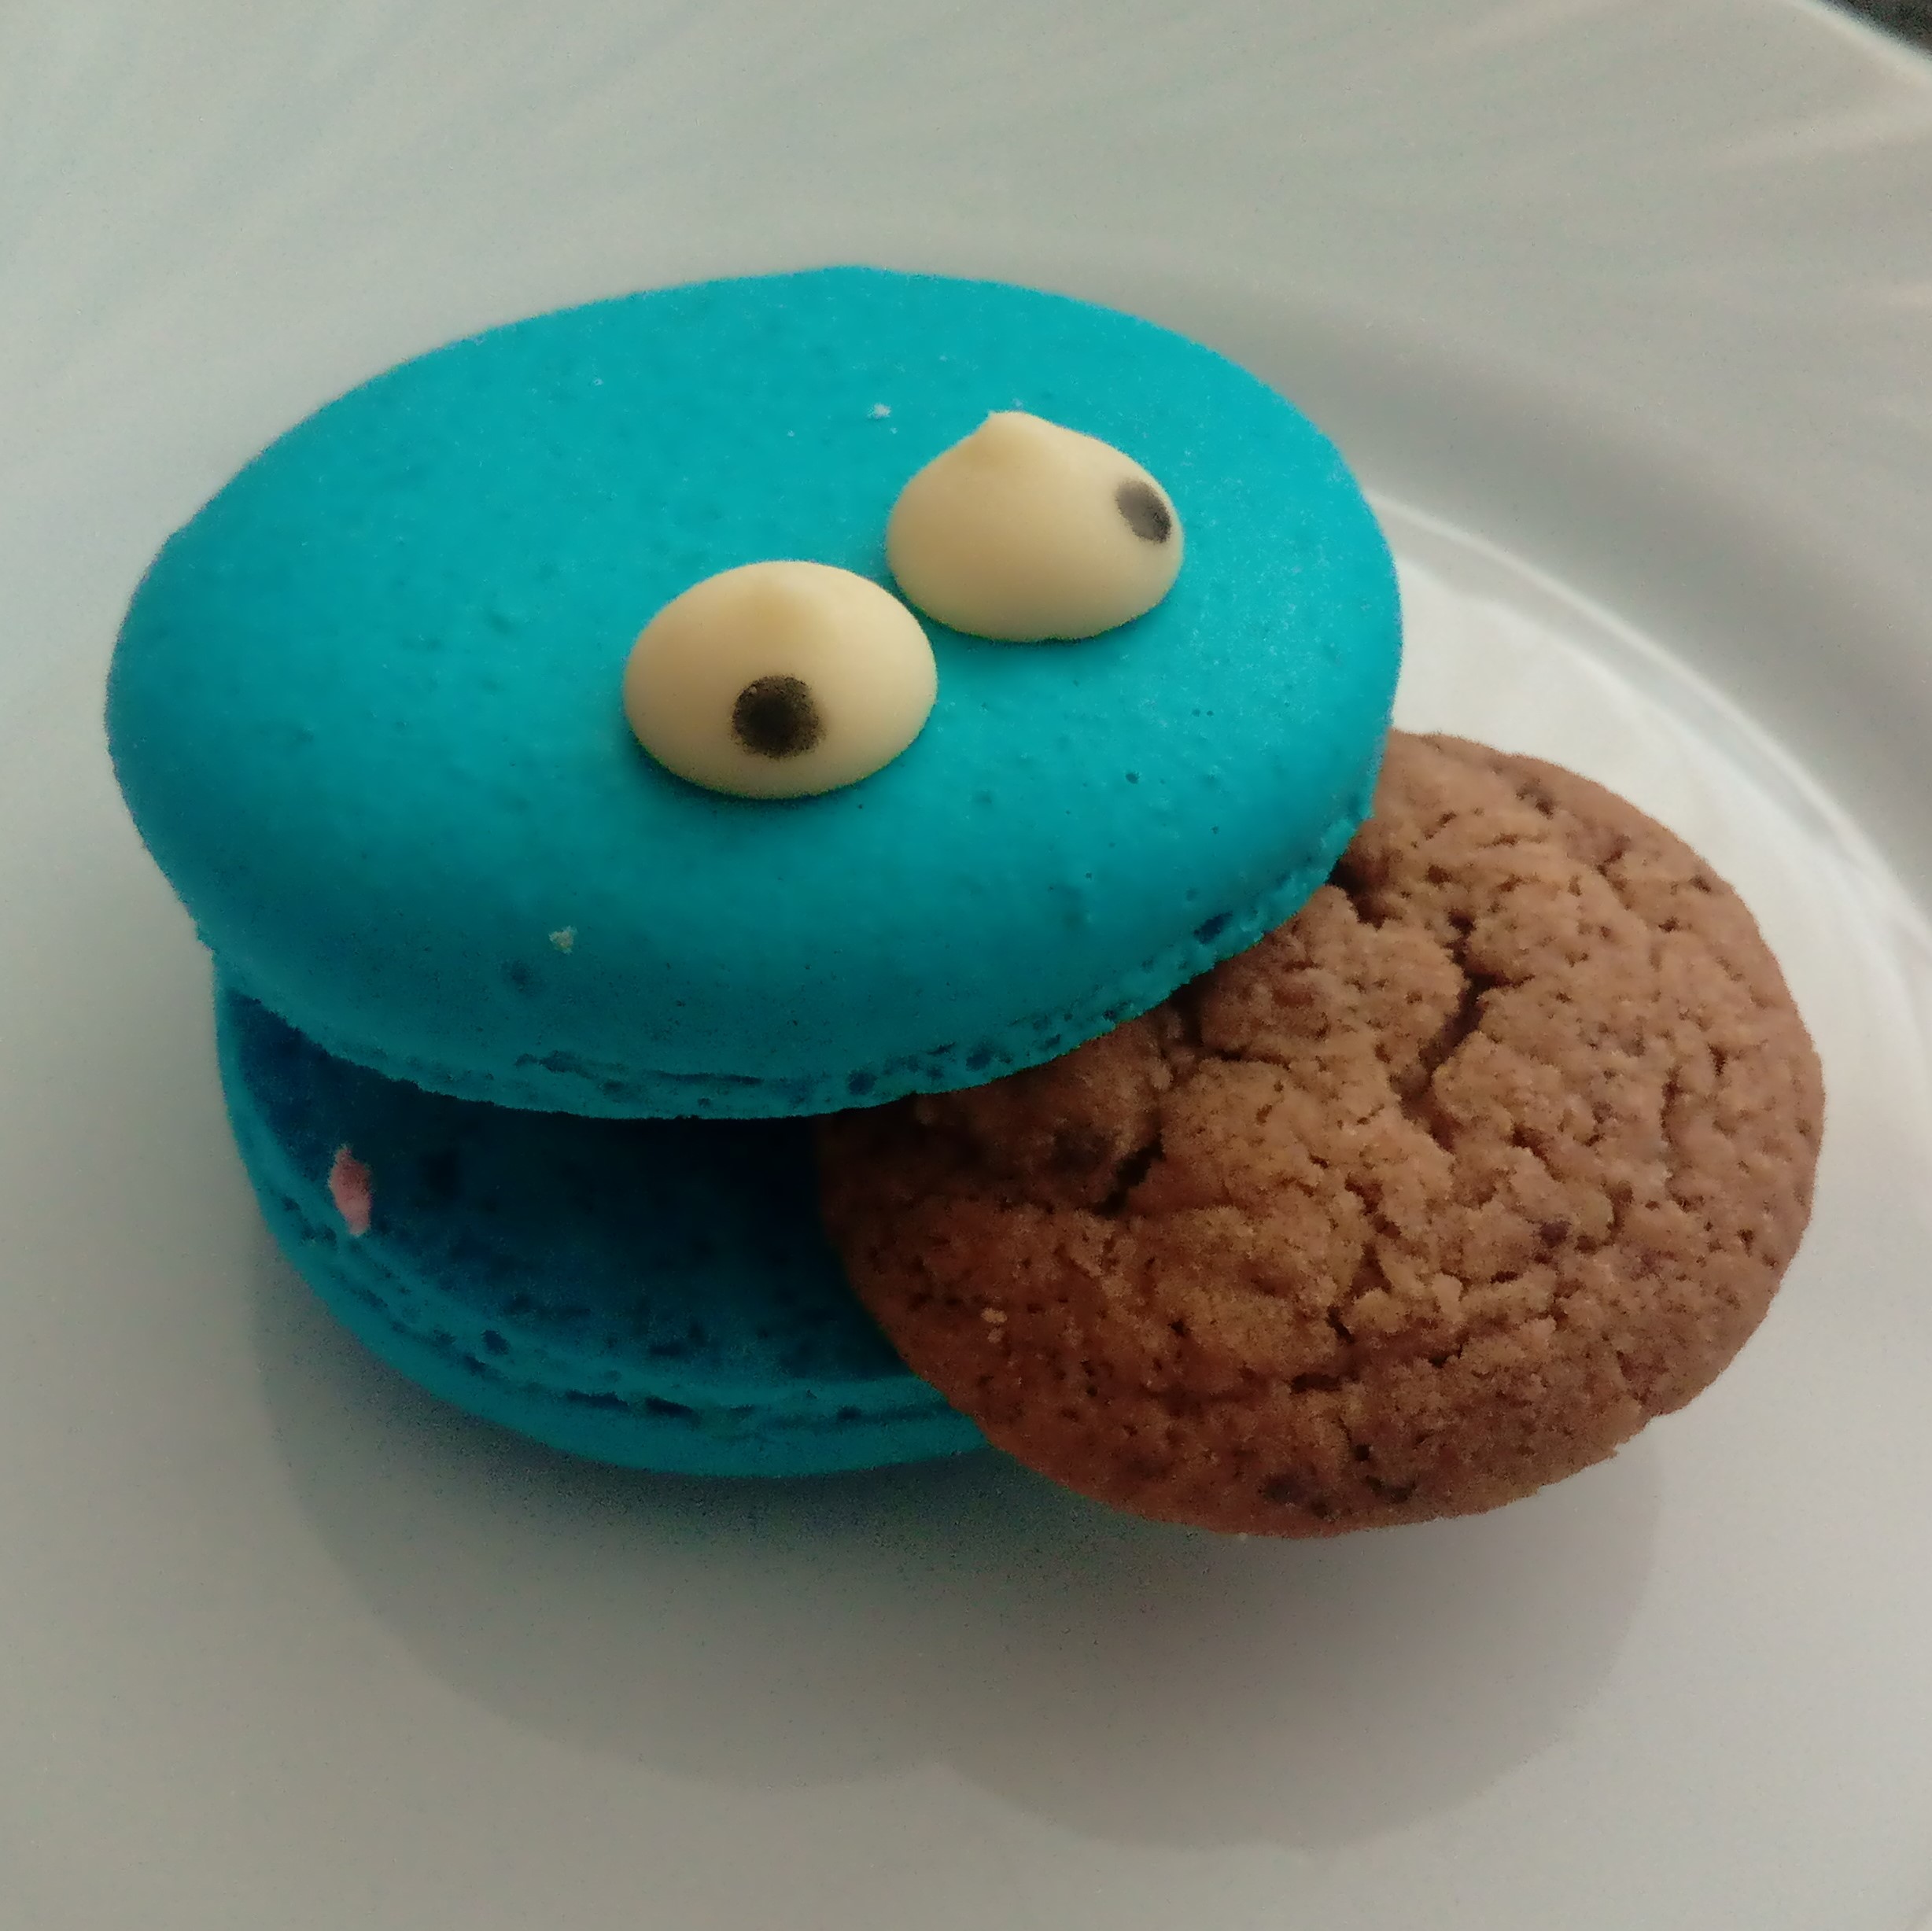 A cookie shaped like Cookie Monster